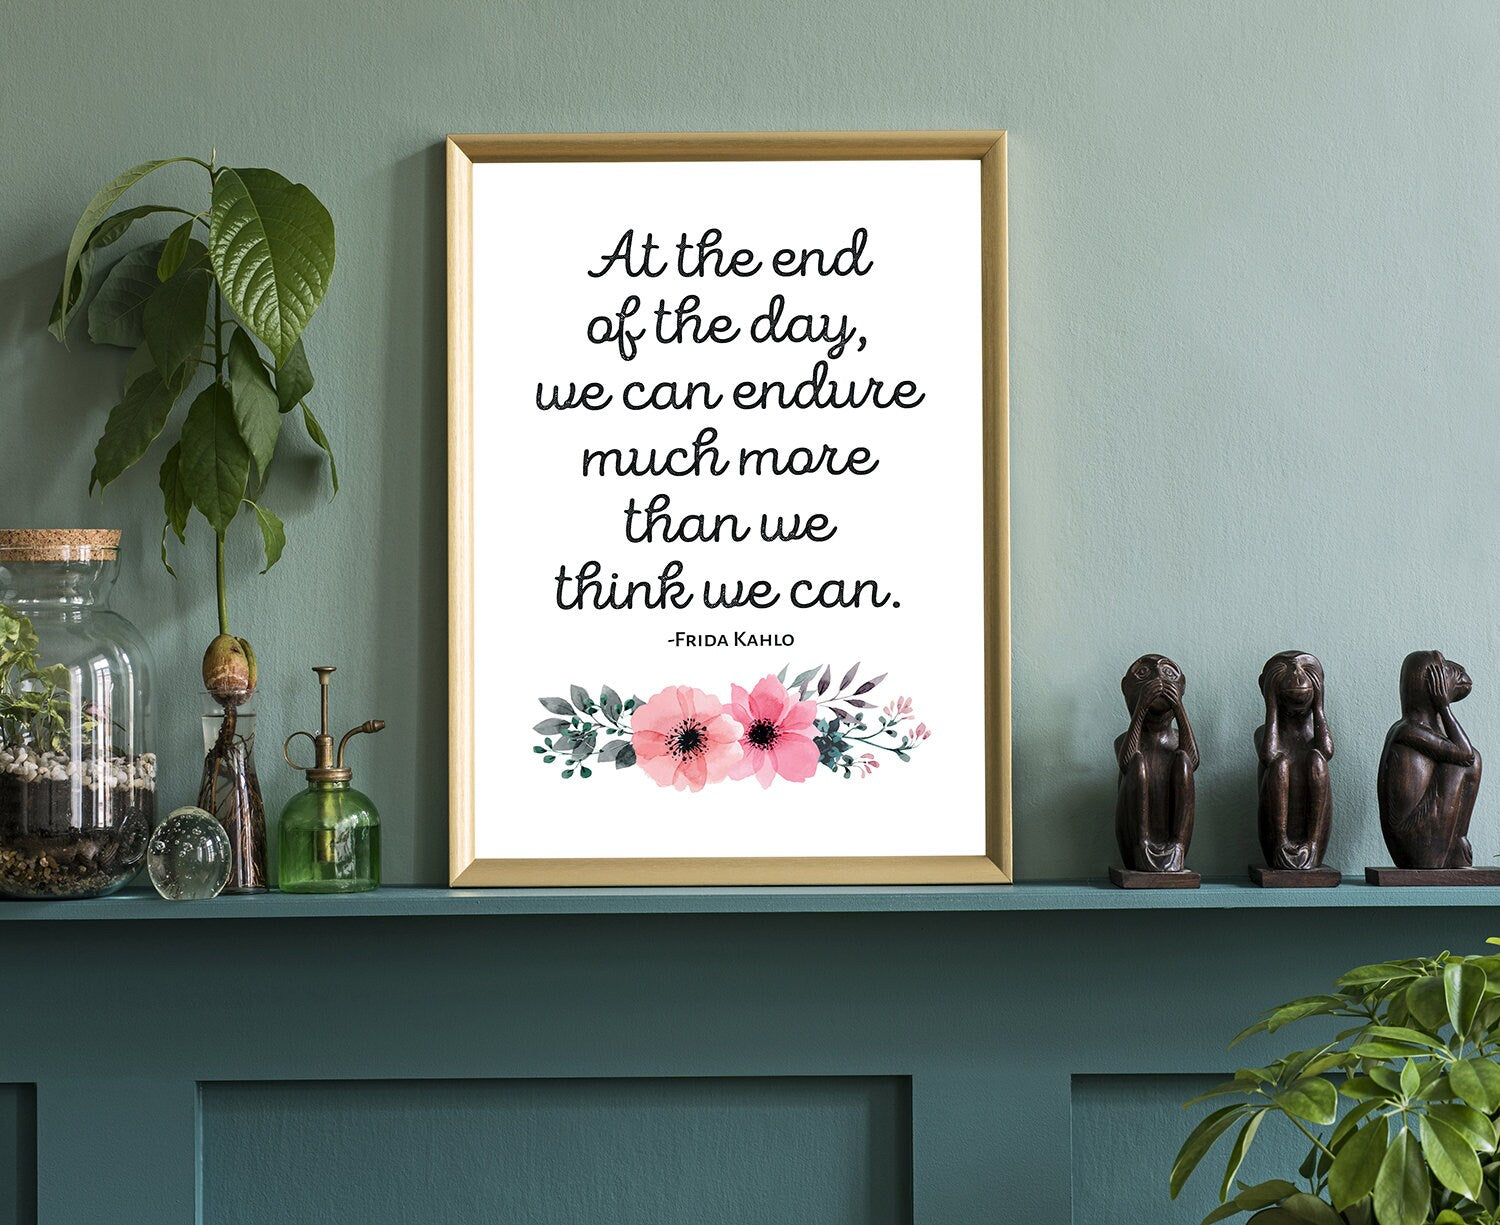 At the end of the day, Frida kahlo quotes, Poster prints, Inspirational quote prints, Motivational quote prints, Home wall art, Wall decor